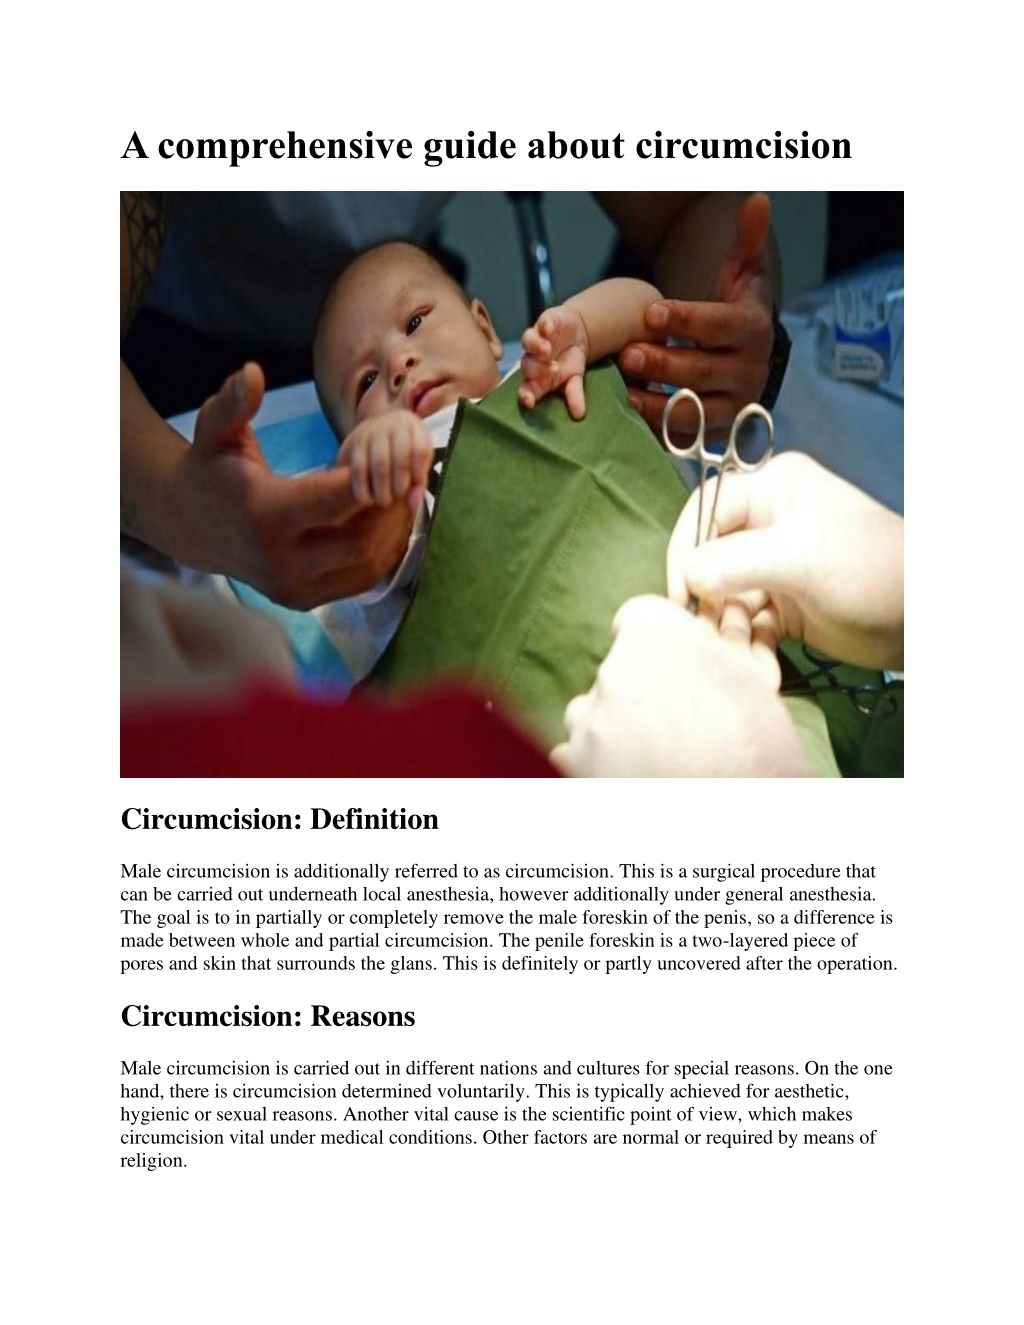 Ppt A Comprehensive Guide About Circumcision Powerpoint Presentation Id12172961 5514